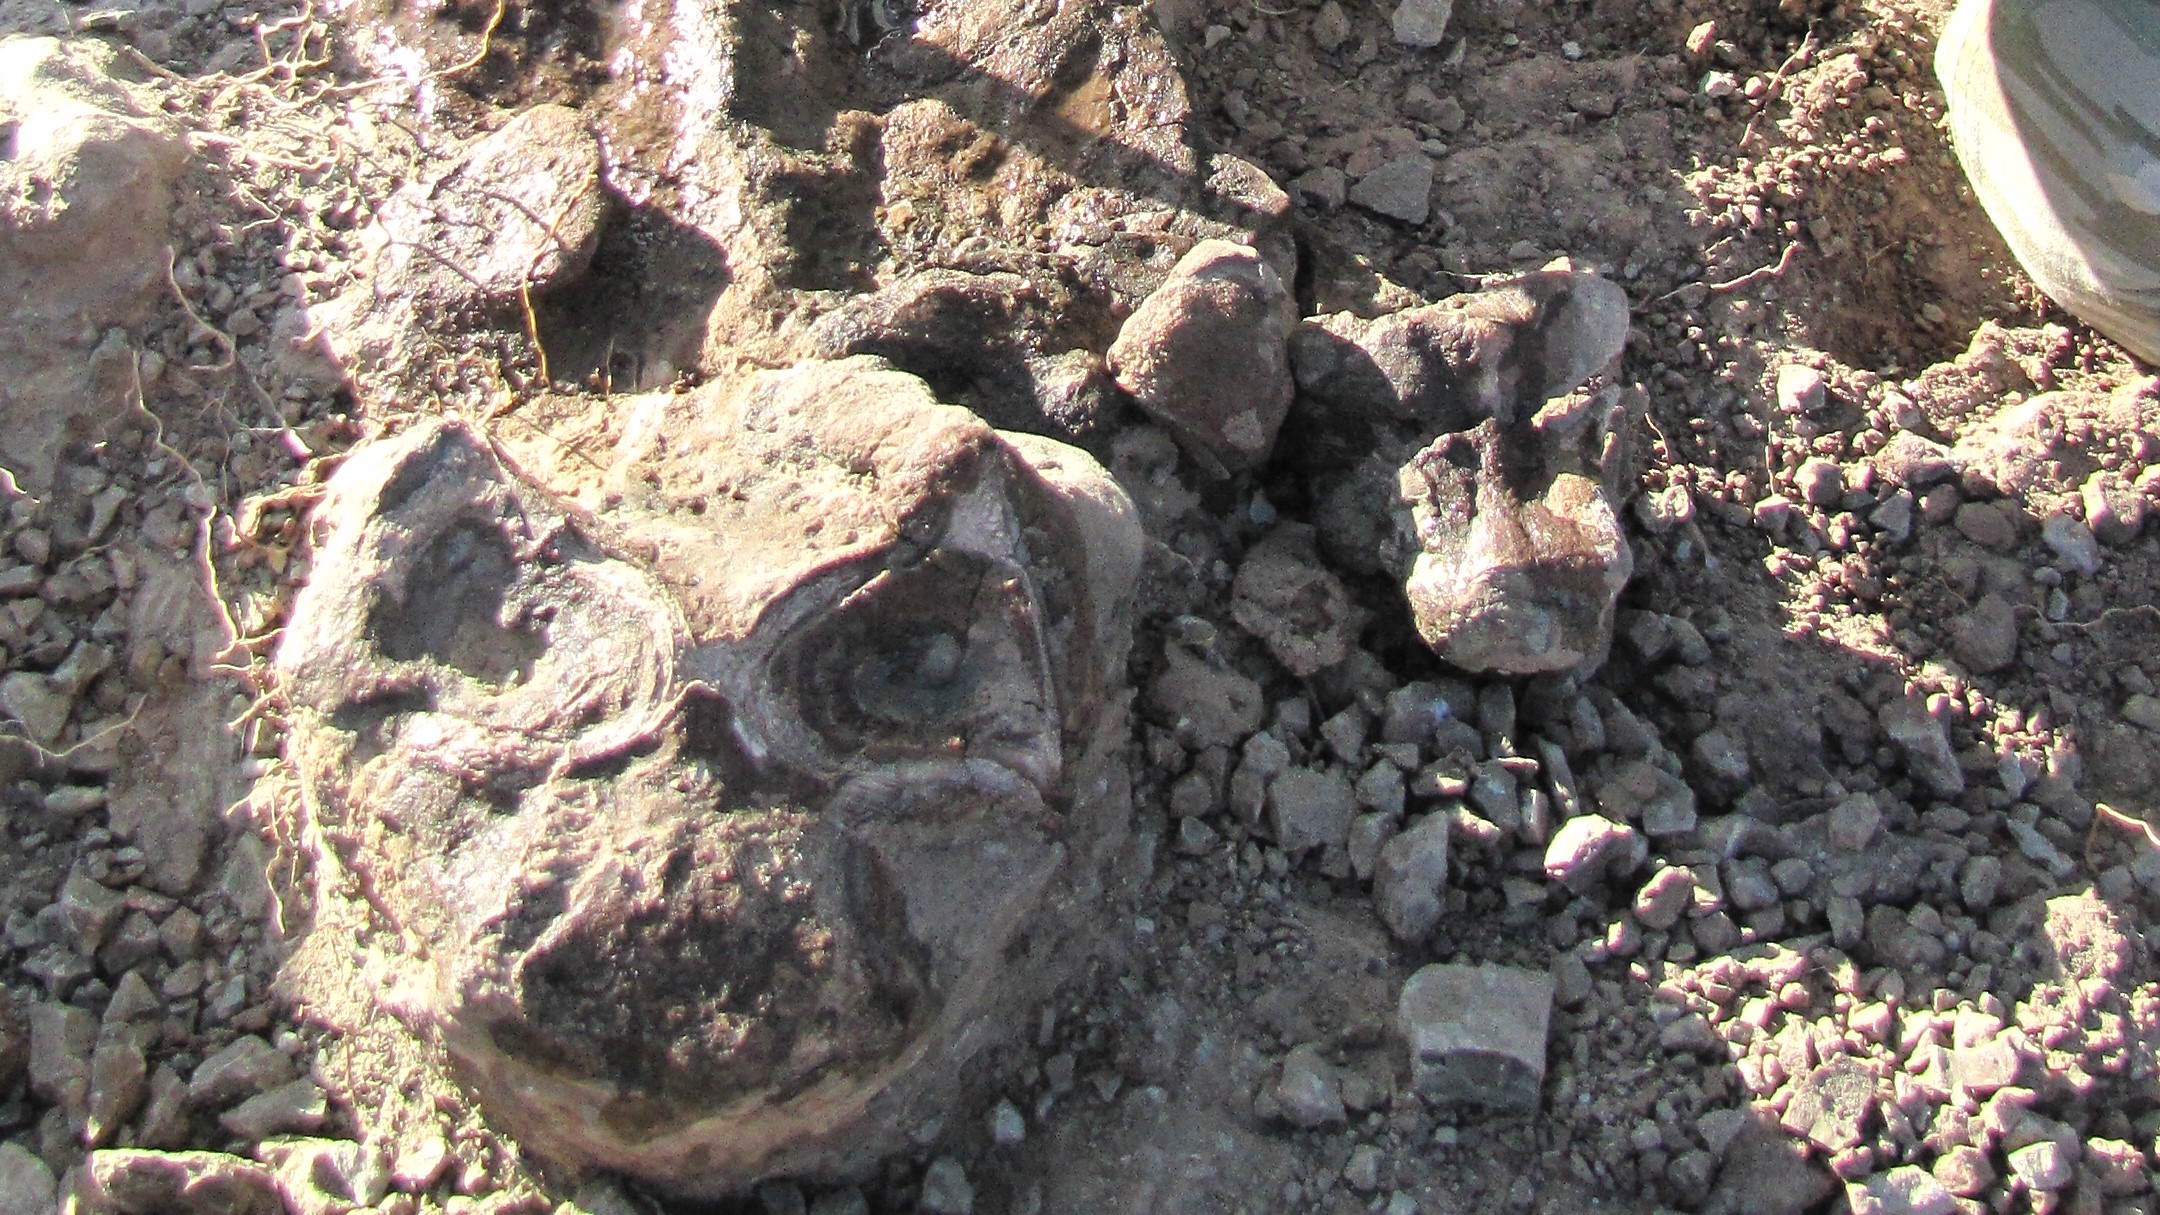 Face-to-face with a lystrosaurus fossil in the field. The animals seemed to have died in clusters, perhaps indicating they were gathering around shrinking water supplies during a drought.